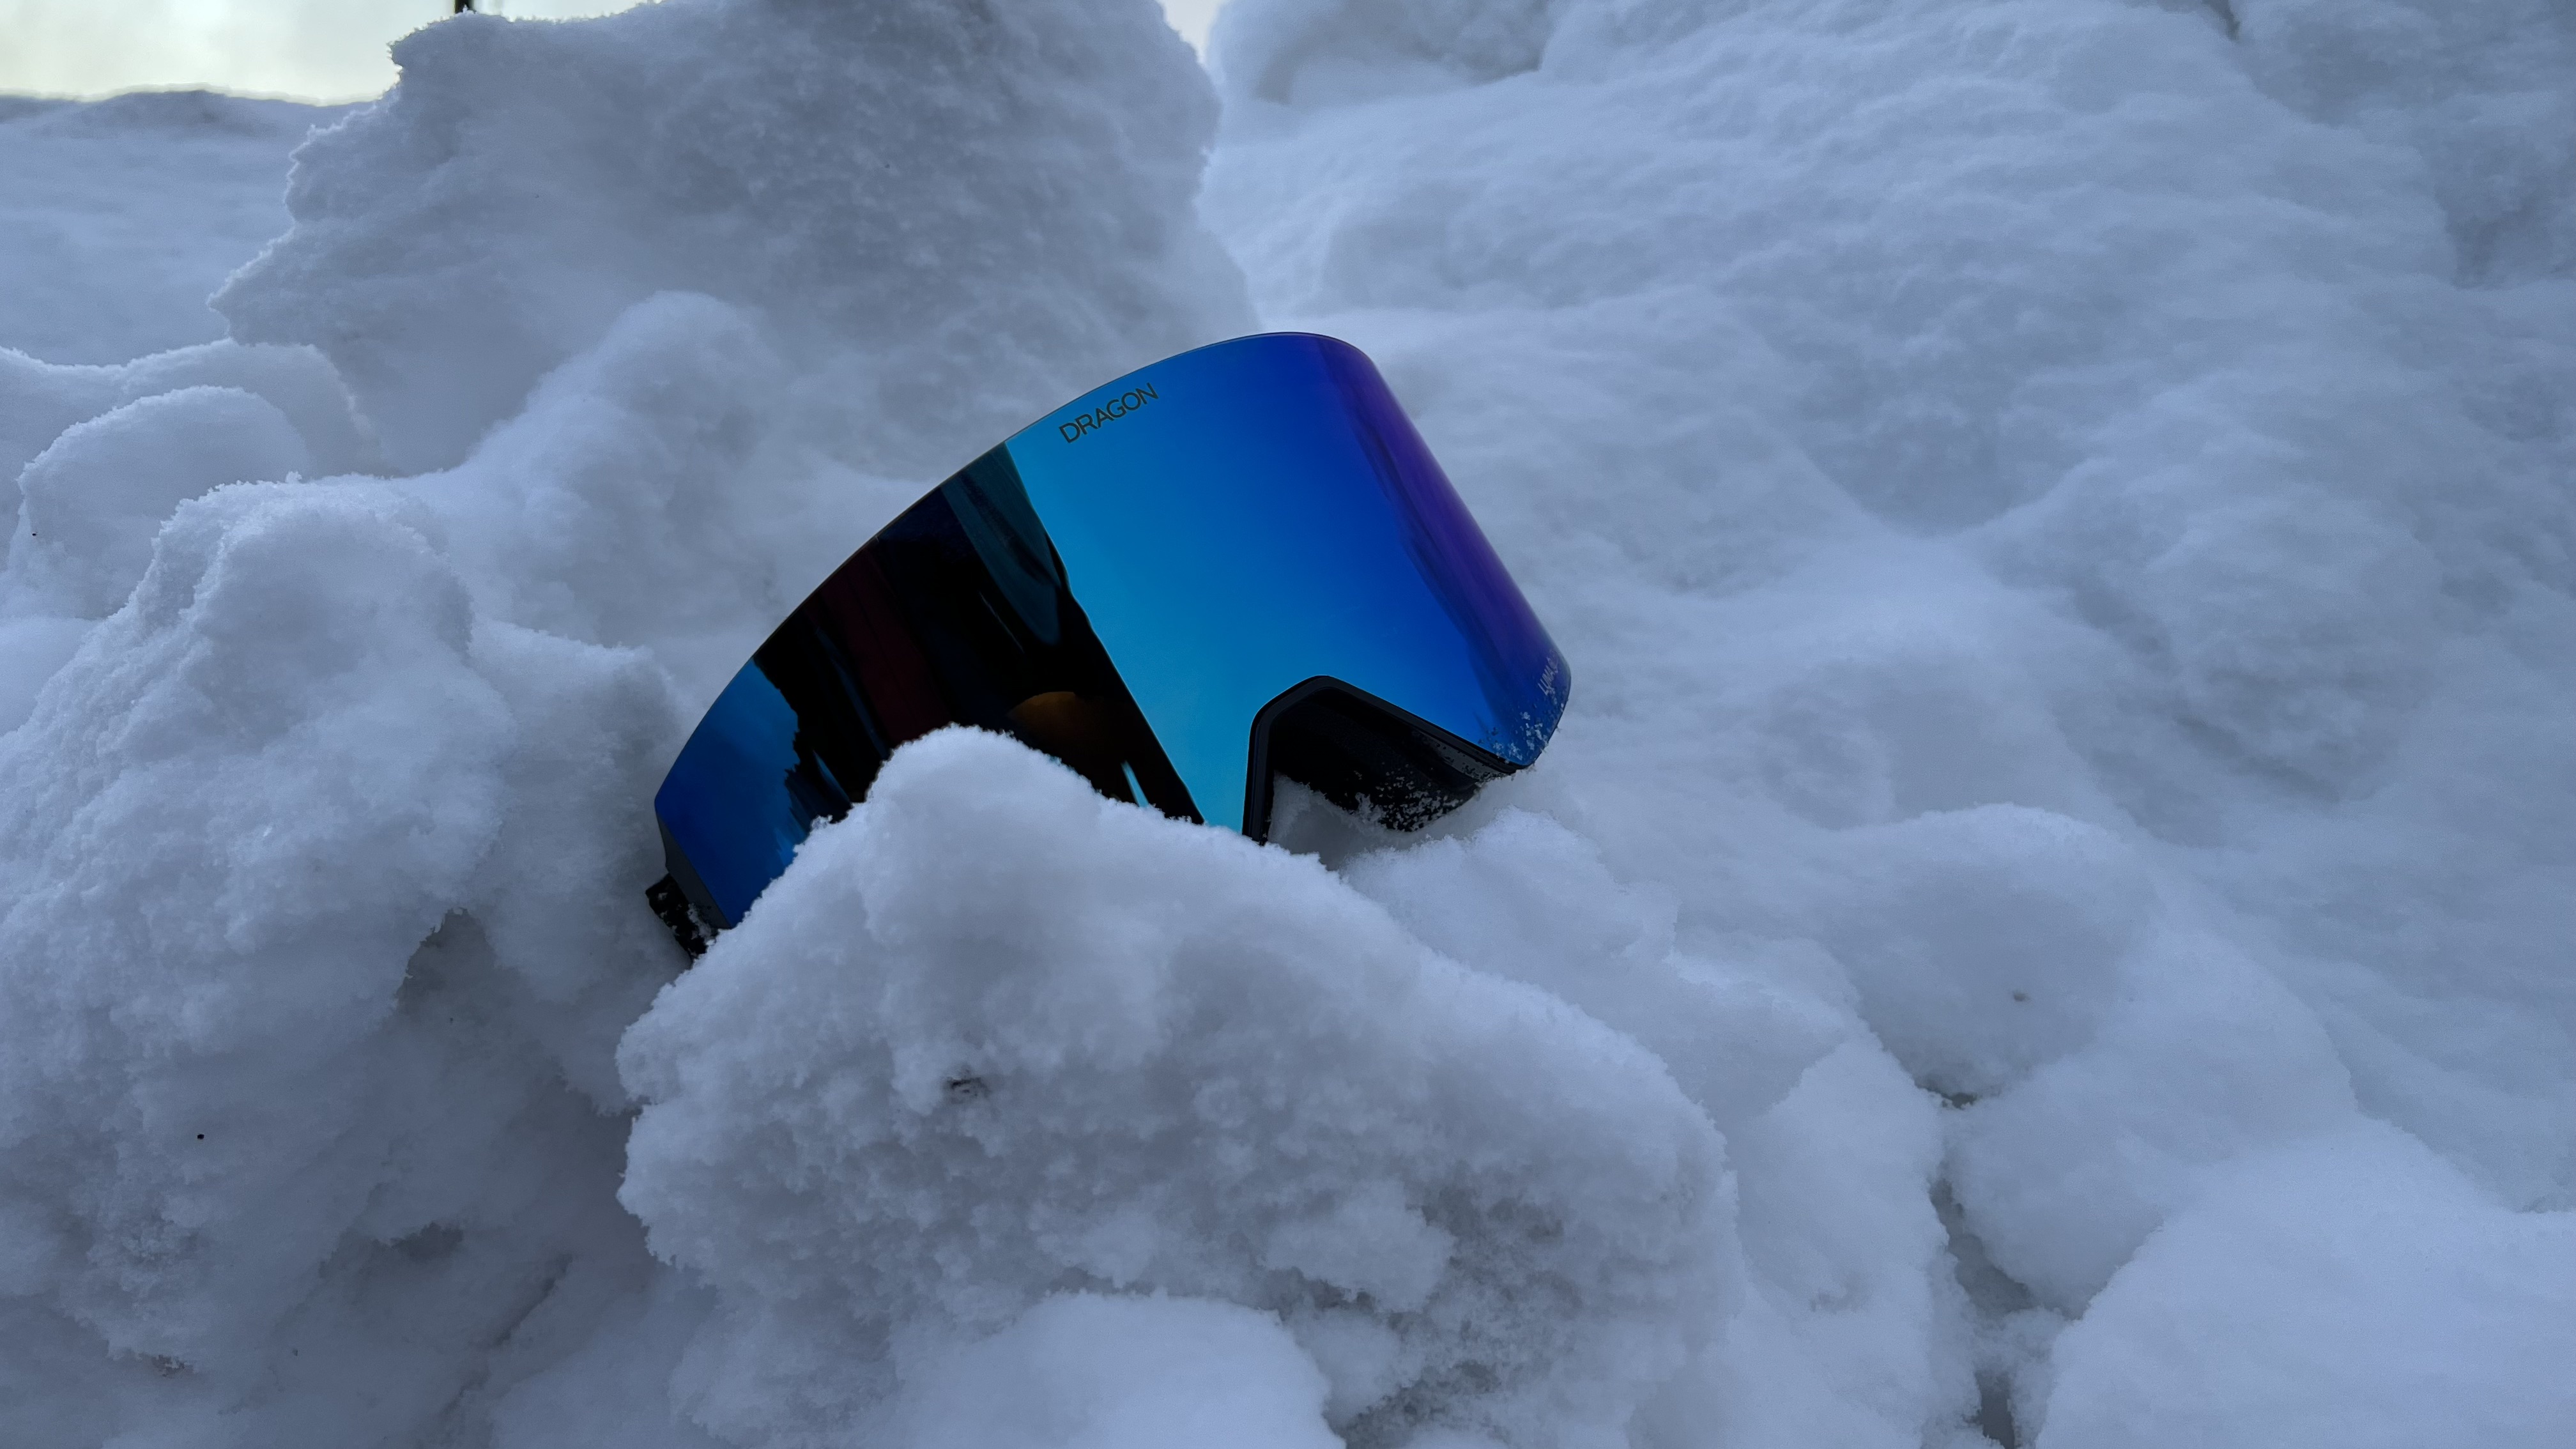 Dragon RVX Mag OTG review: The best snowboarding goggles we've